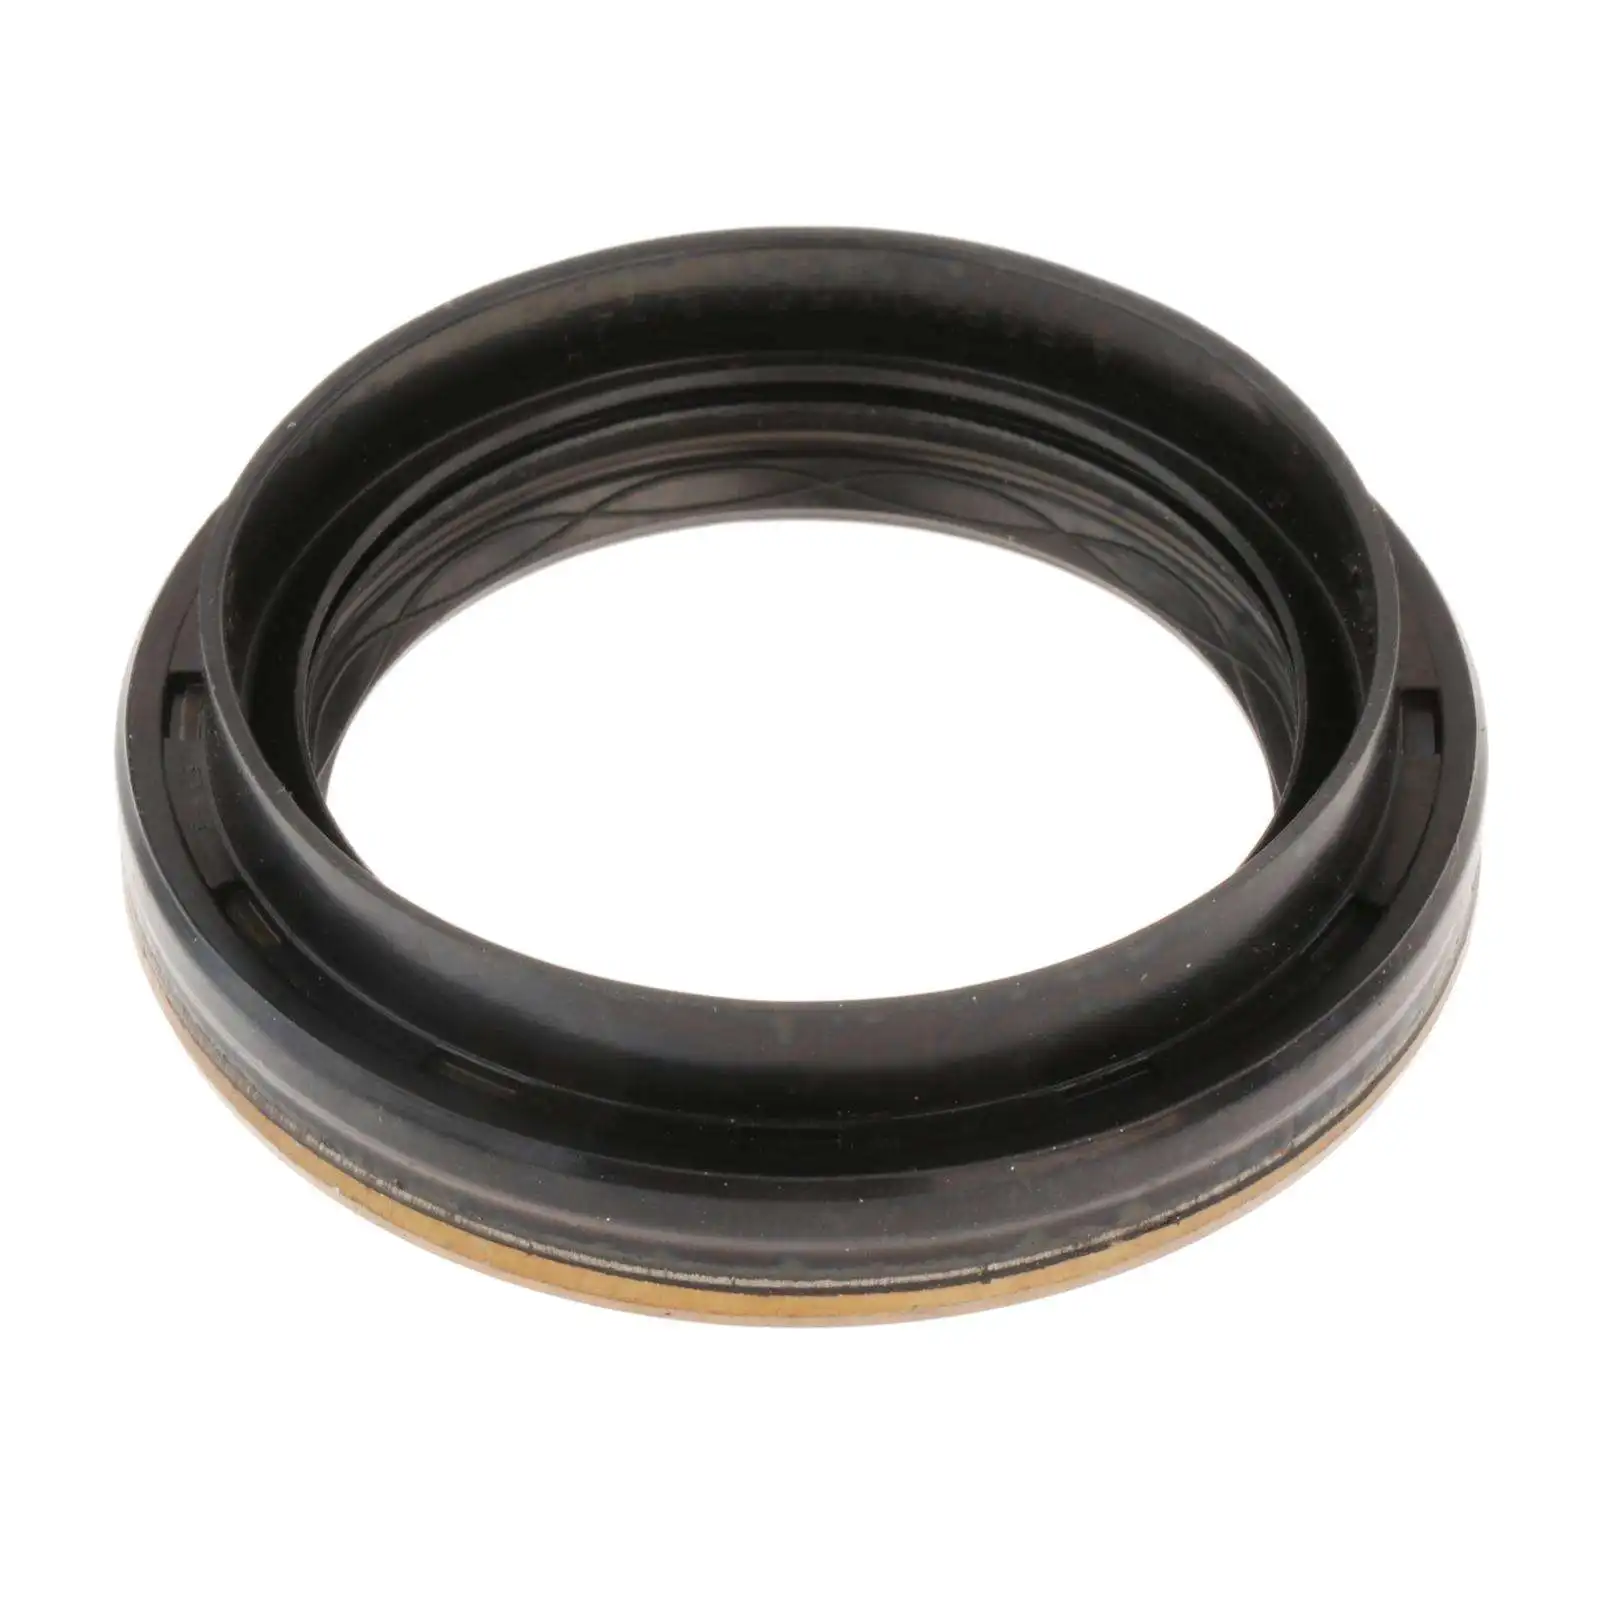 

1PC Half Shaft Oil Seal DPS6 6DCT250 Spare Parts Rubber Replacement High Reliability Fit for Ford Focus for Fiesta